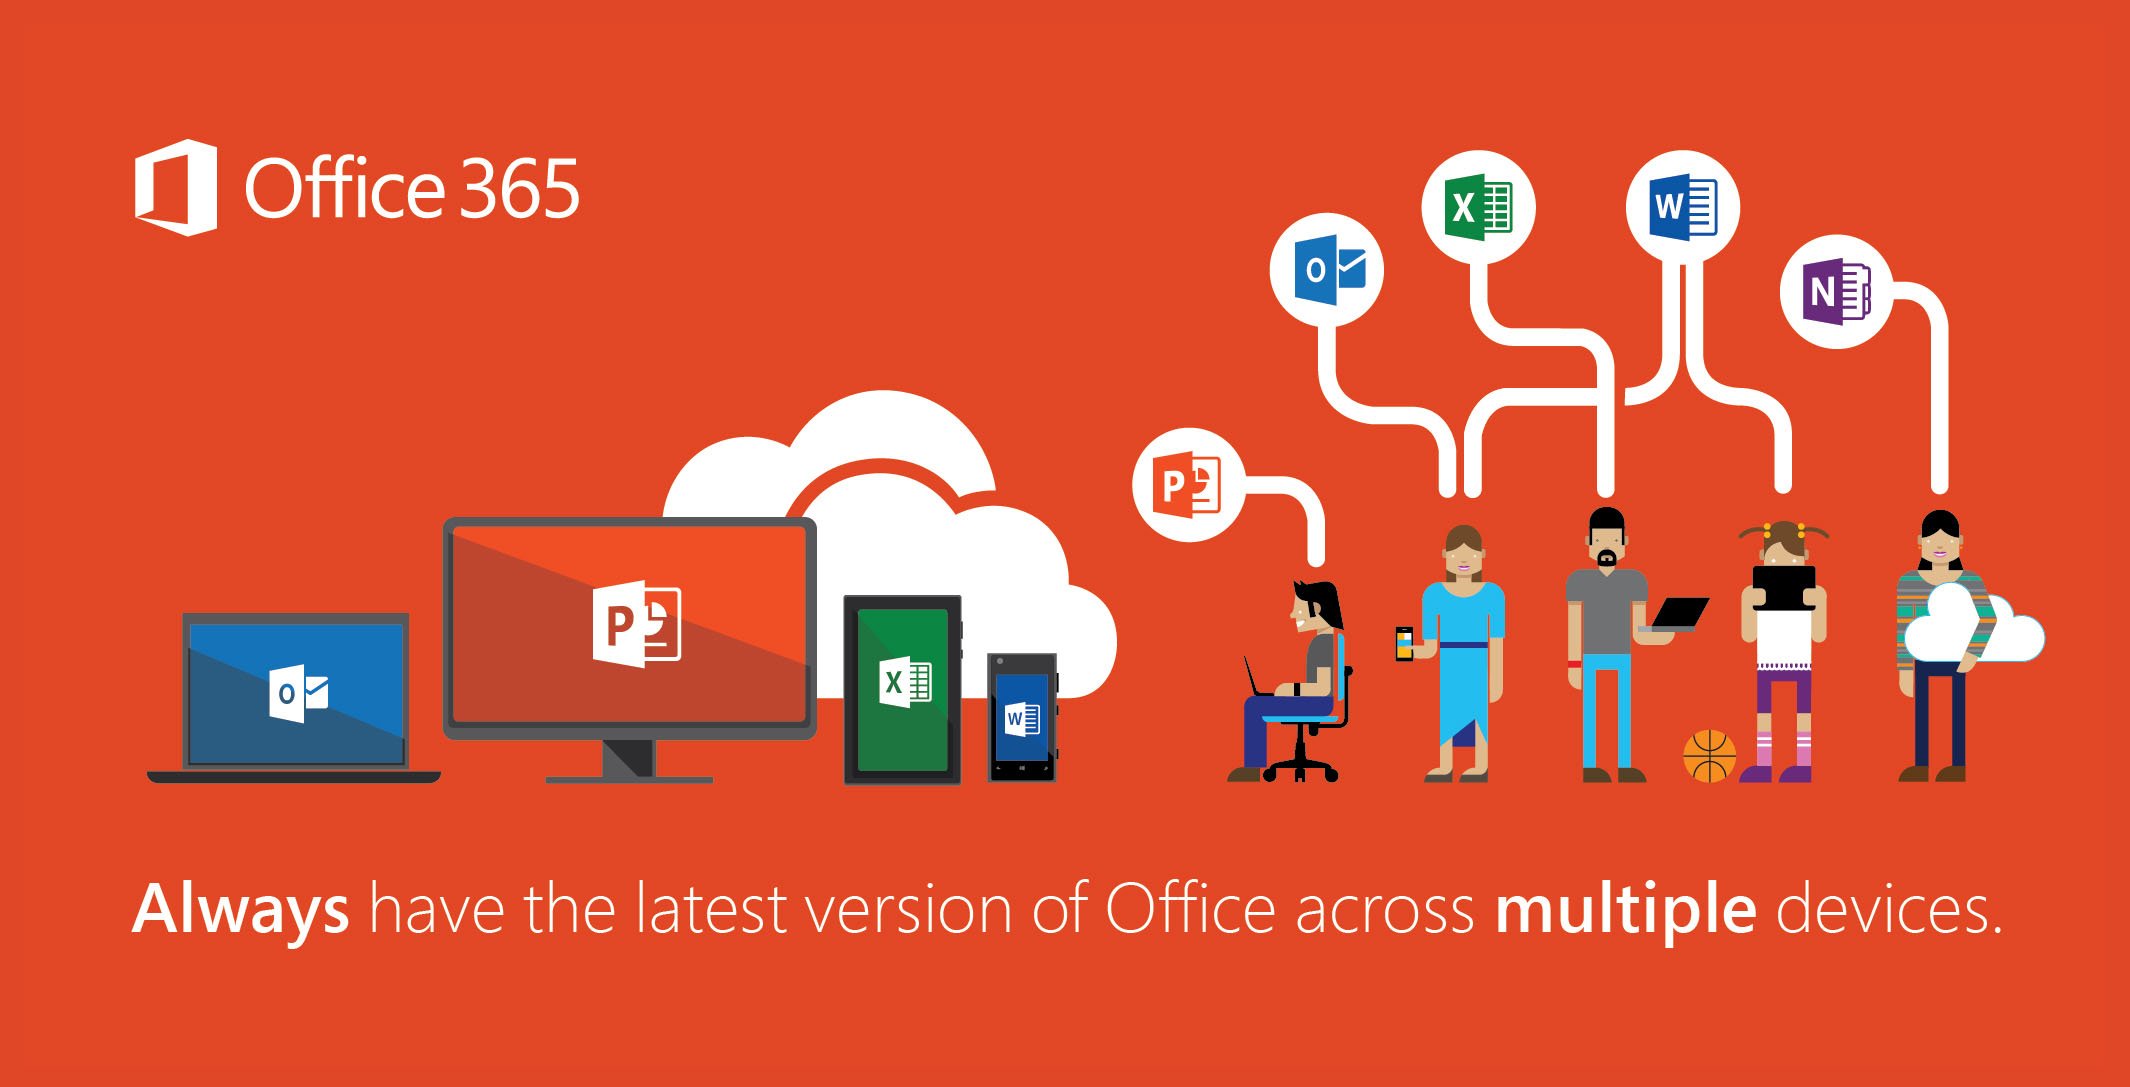 can office 365 be uninstalled and then reinstalled